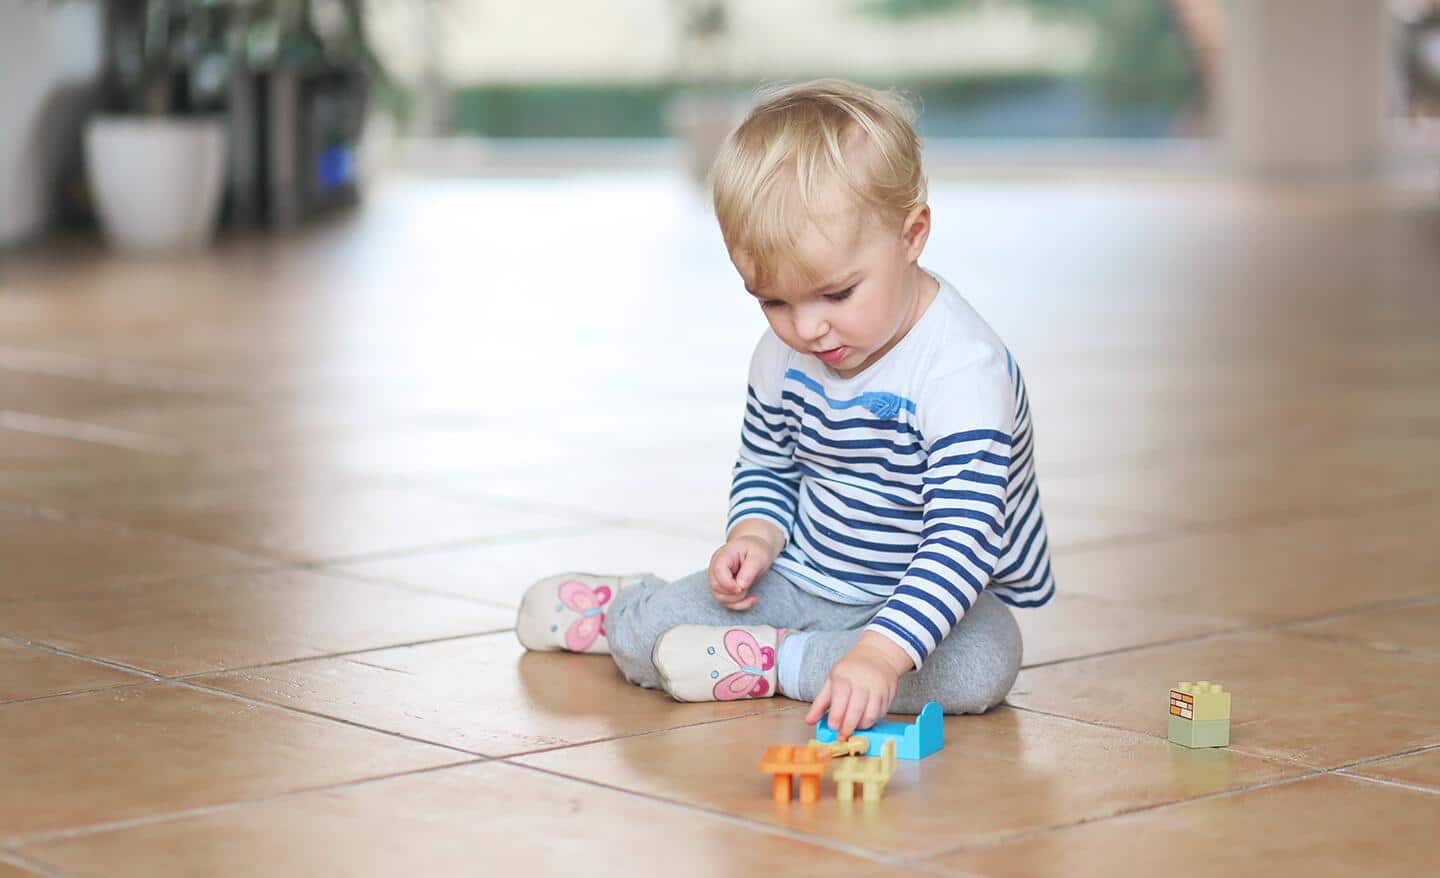 A toddler sits on a tile floor and plays with toys.